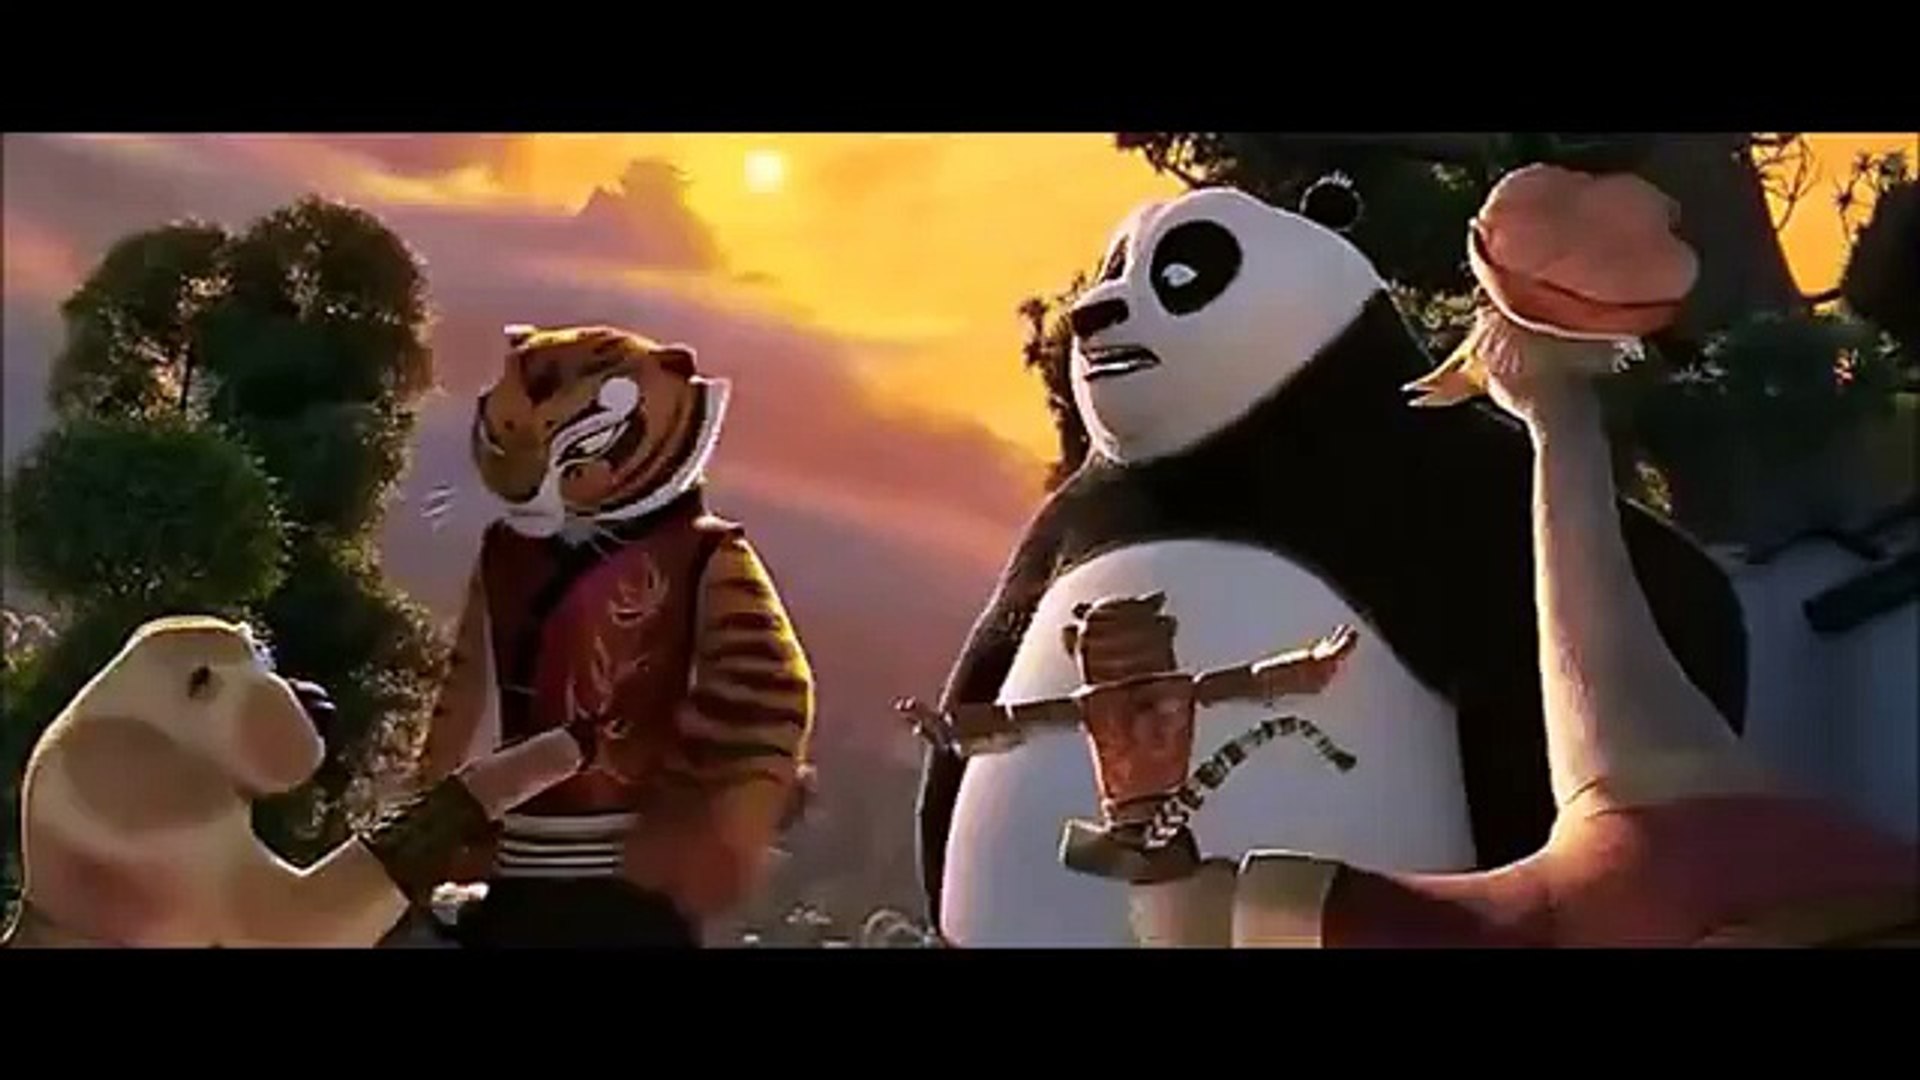 Tigress and Po Moments in Kung Fu Panda 2 - video Dailymotion